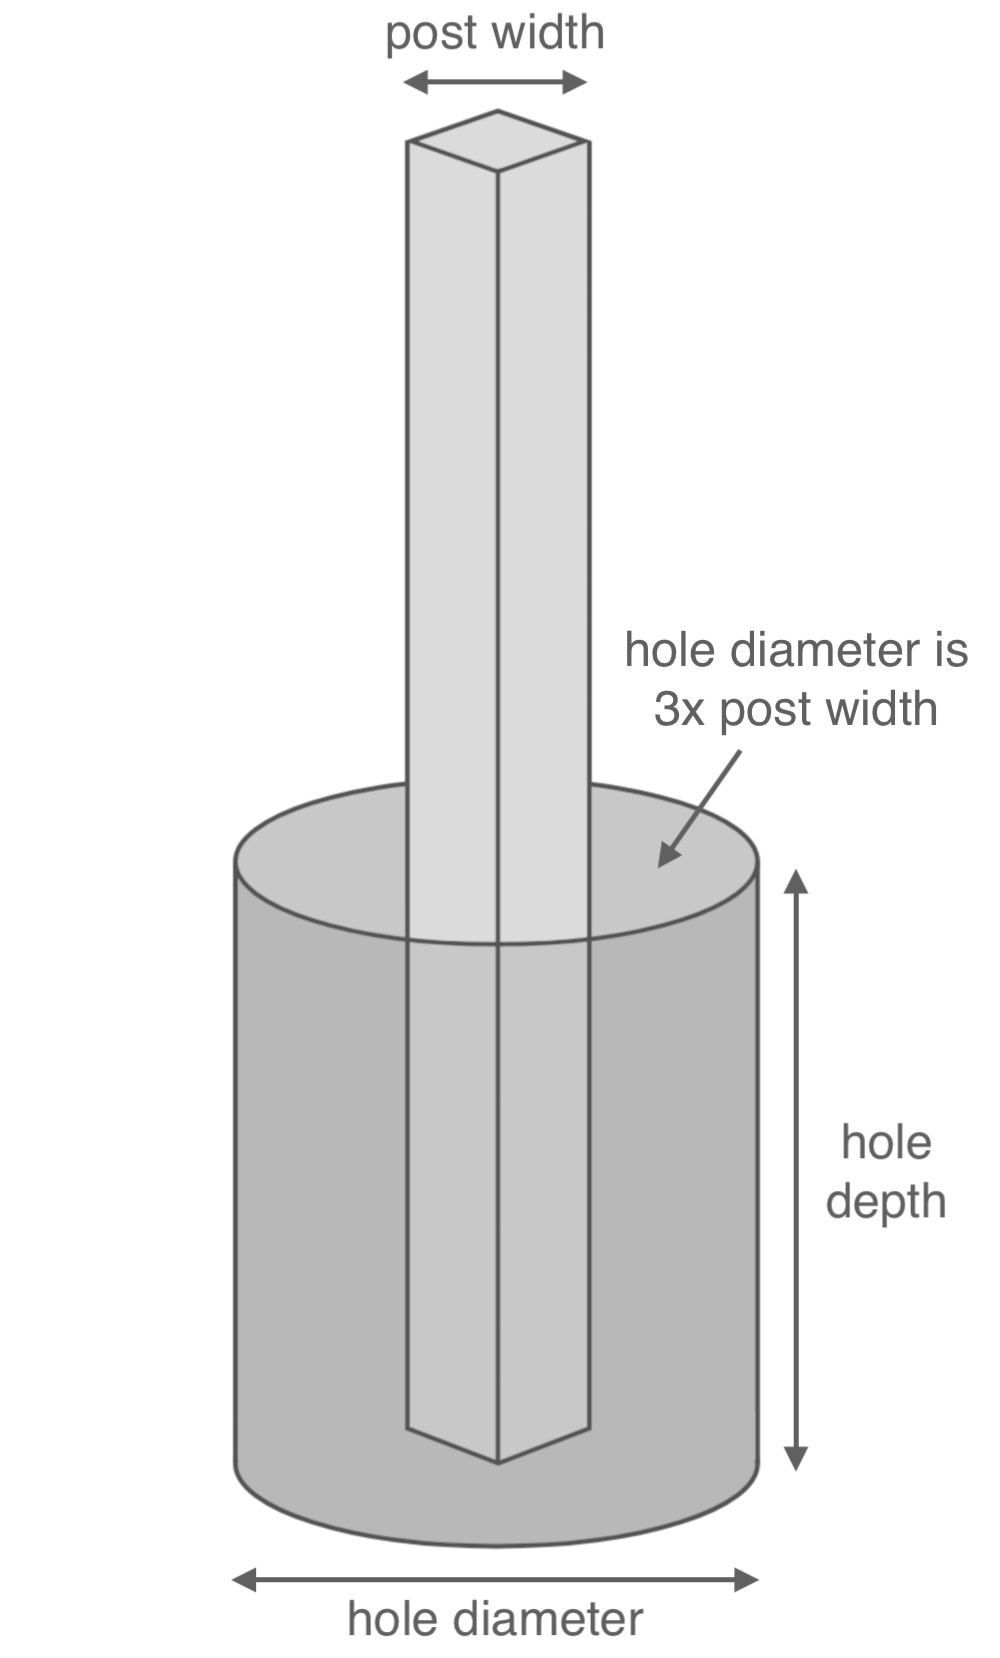 illustration of a fence post and post hole